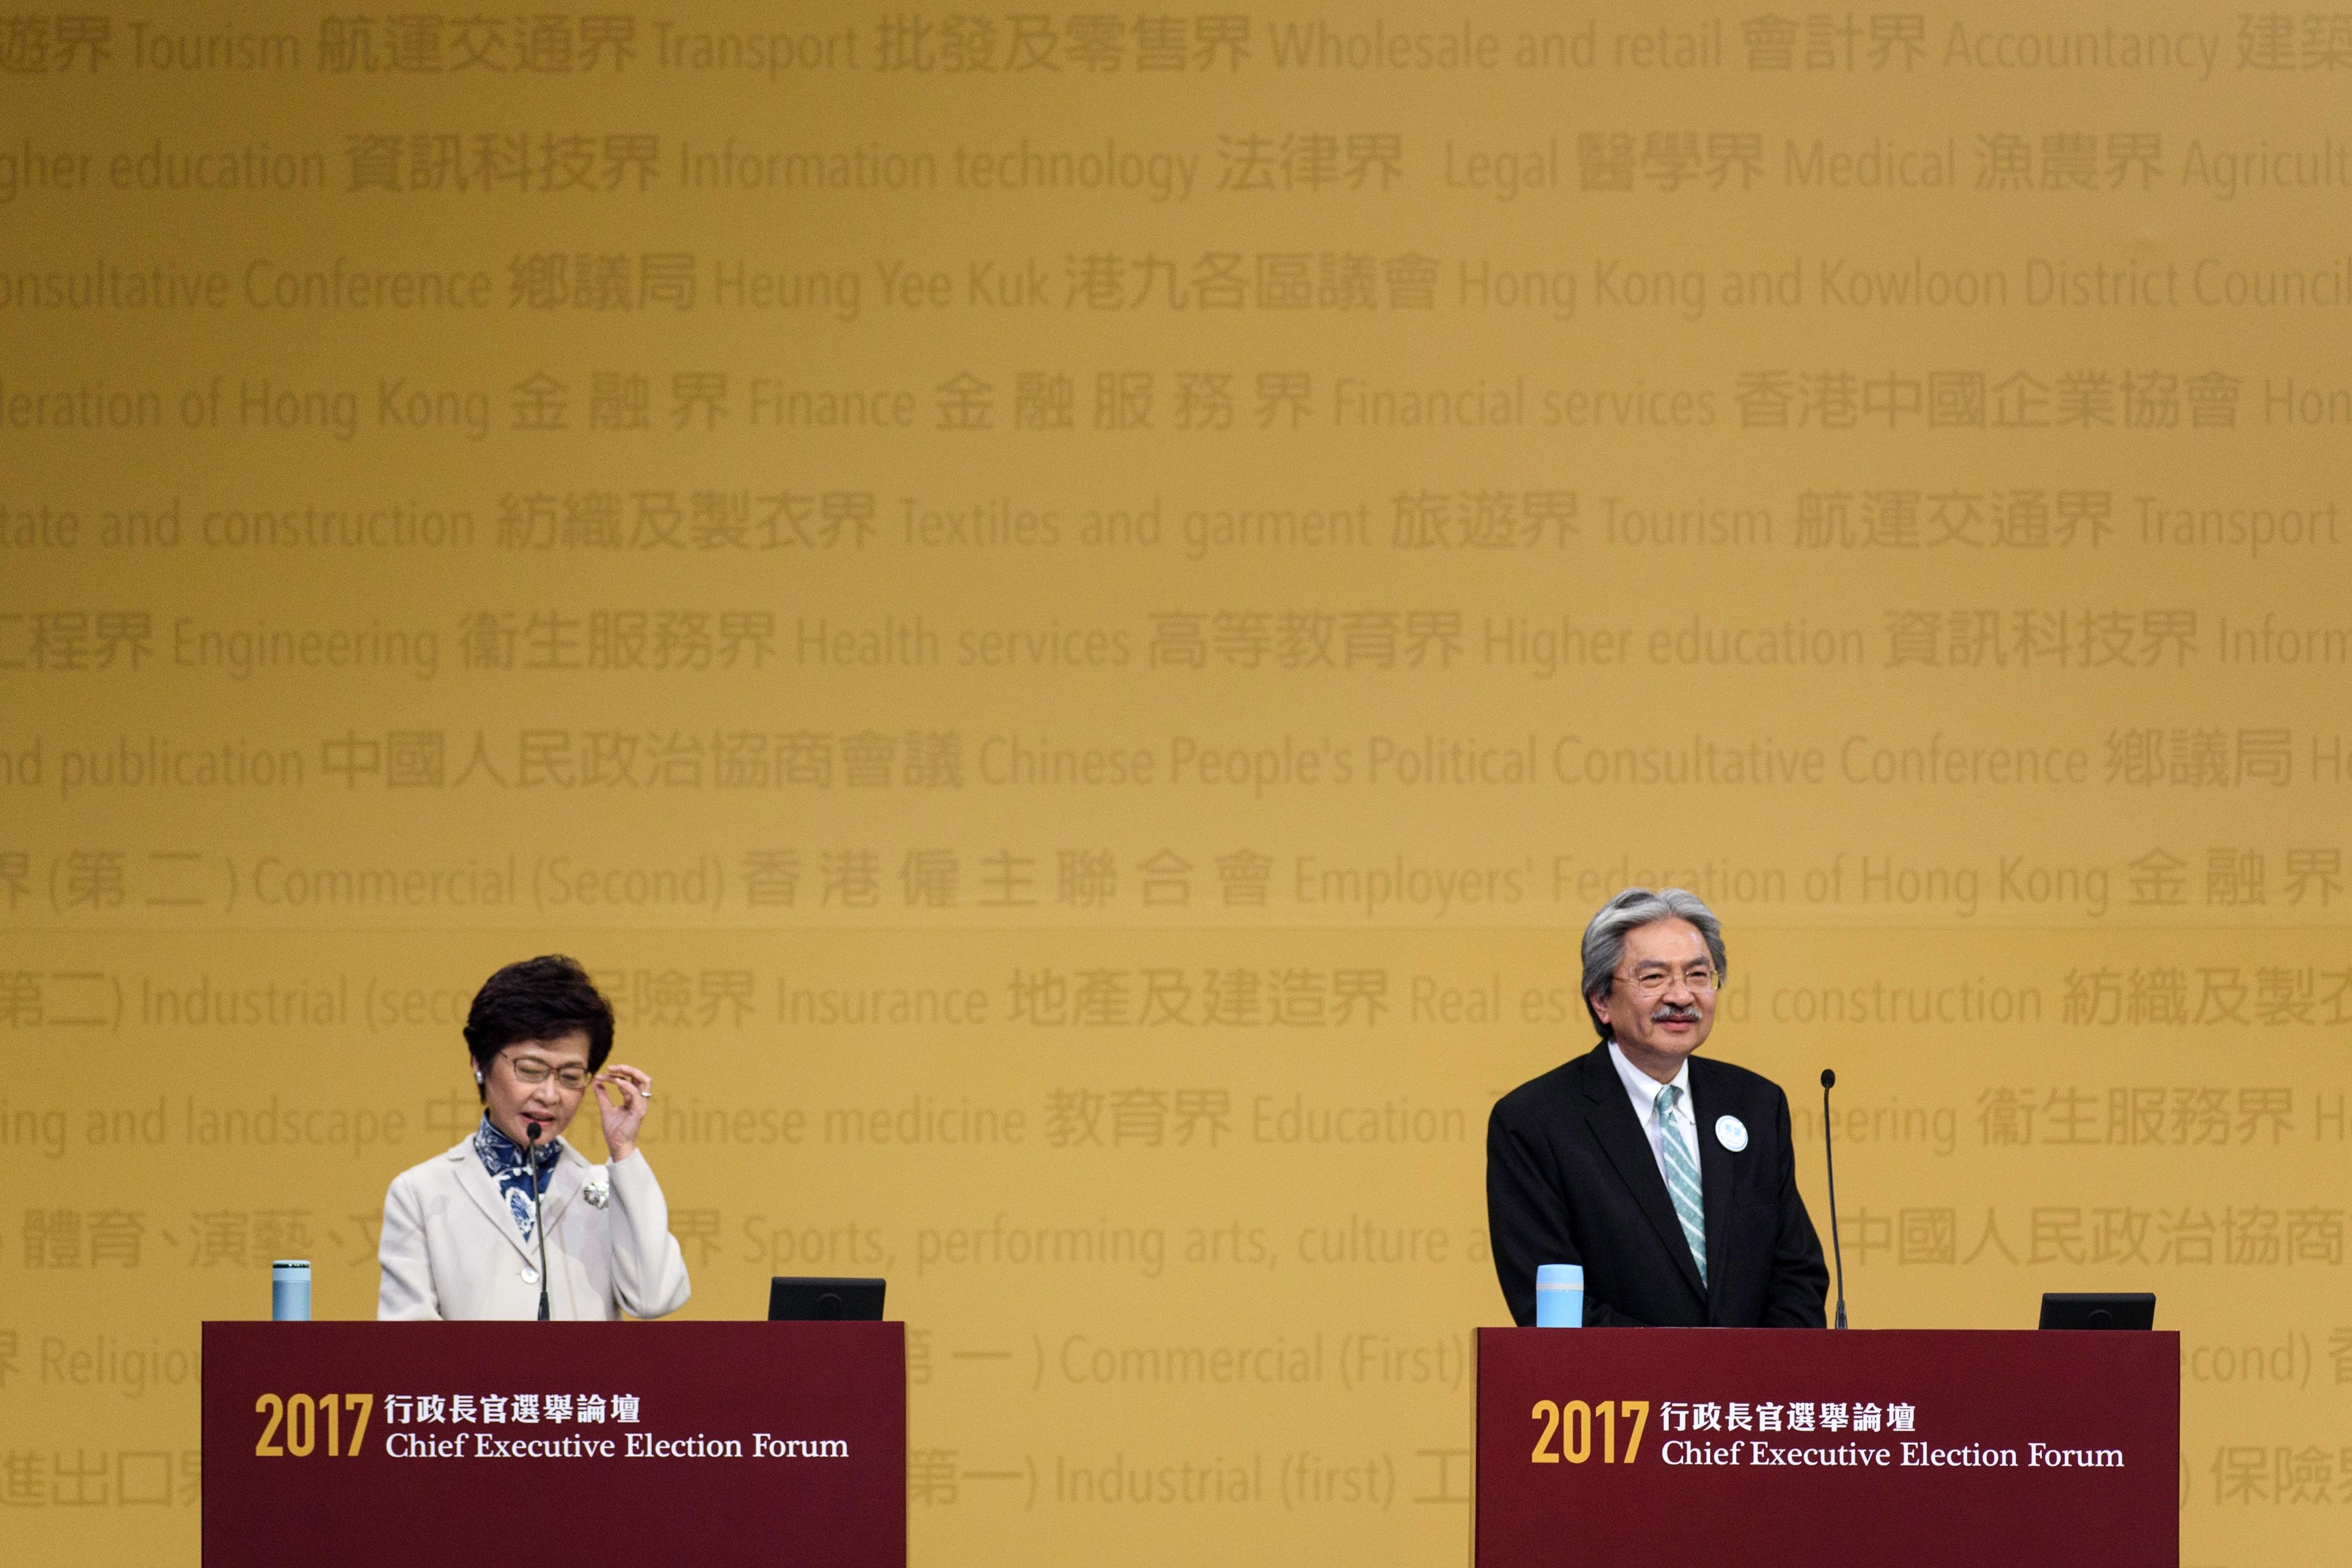 Hong Kong's Chief Executive candidates Carrie Lam and John Tsang on stage during the Chief Executive Election Forum in Hong Kong on March 19, 2017 (Tengku Bahar—AFP/Getty Images)